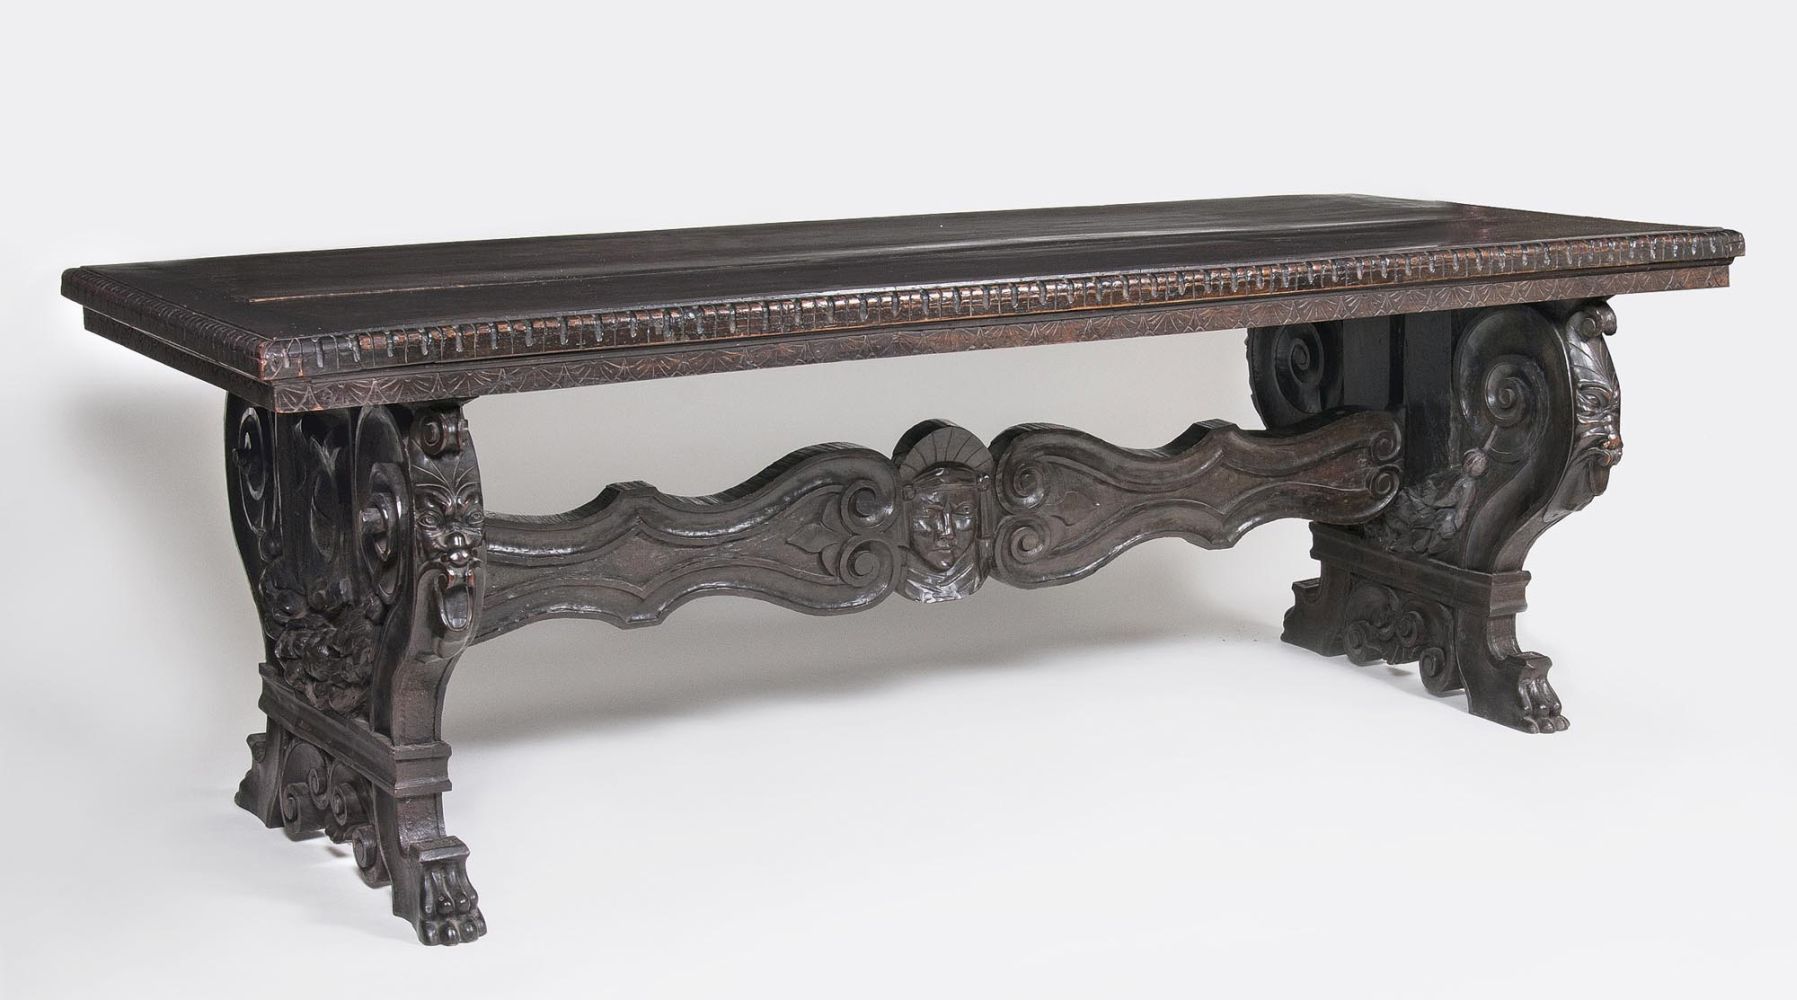 Impressive Gable Table in the Style of Tuscan Renaissance